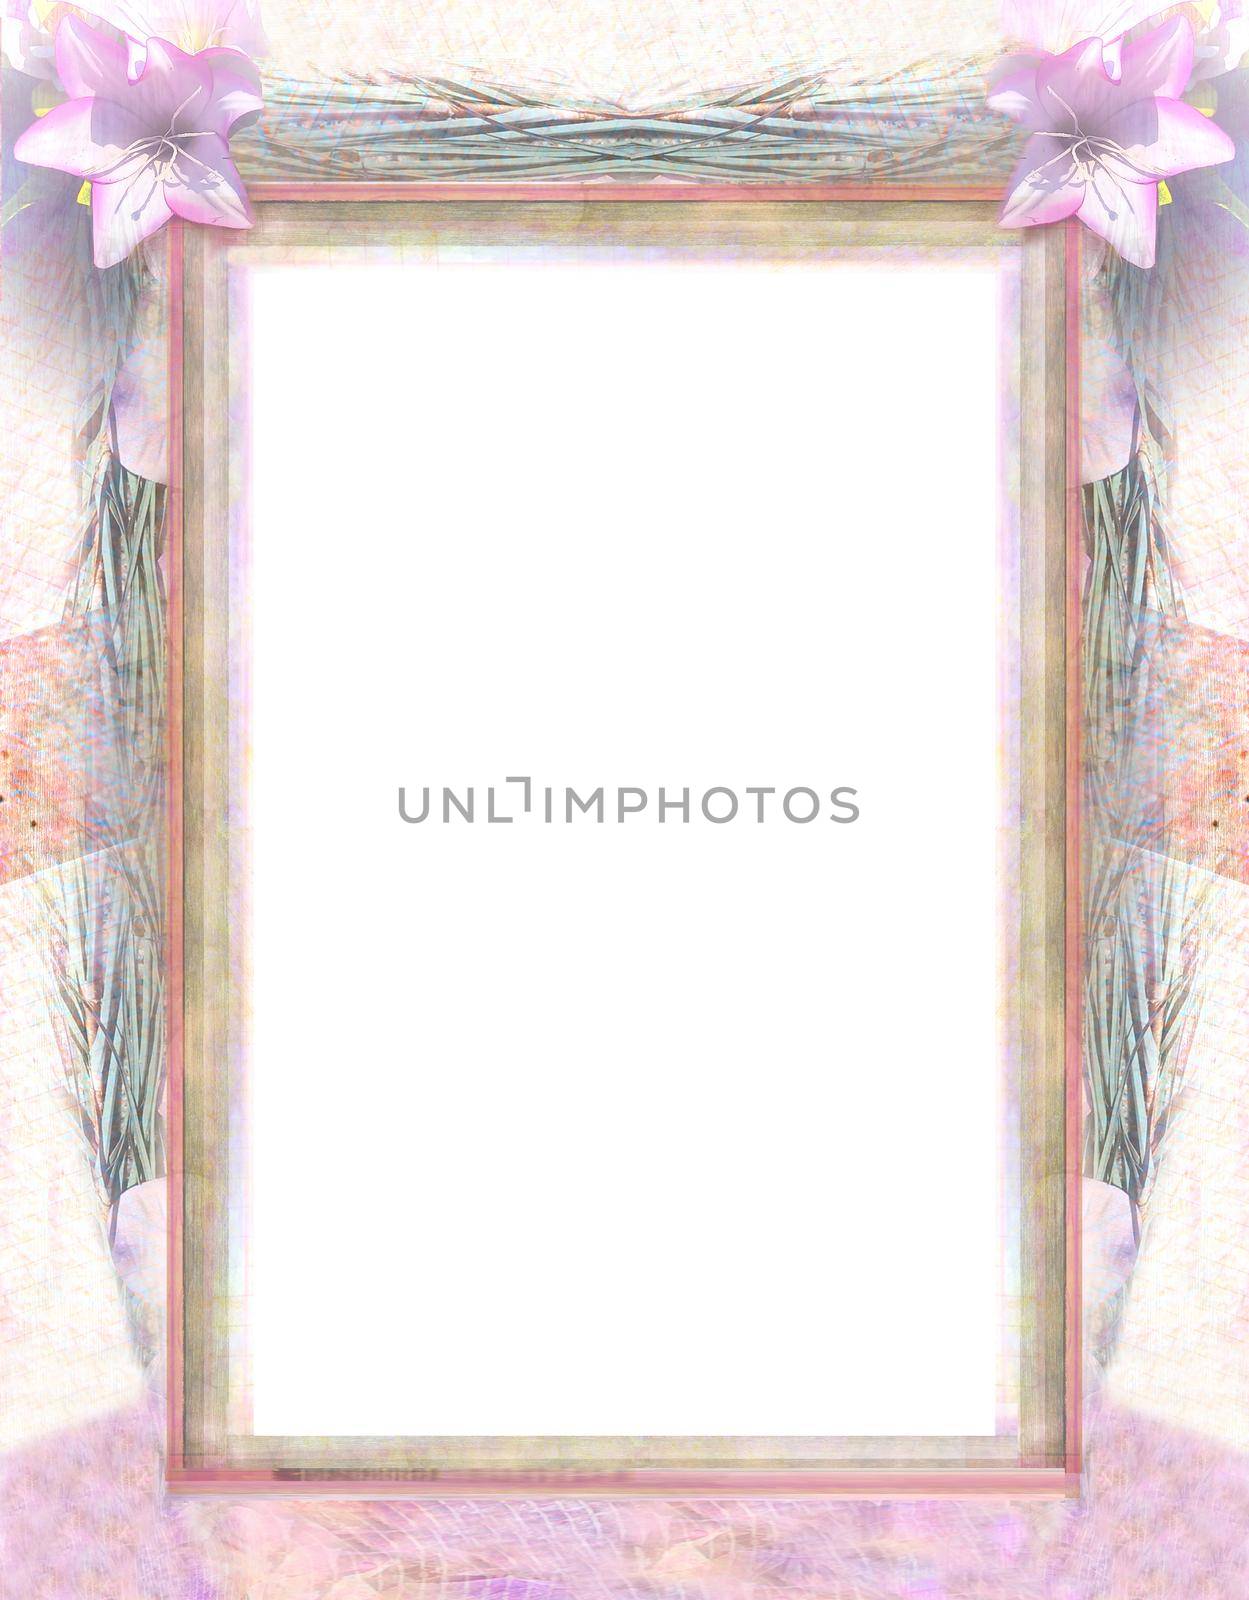 Vintage wooden Grunge Frame For Congratulation with beautiful pink flowers by JackyBrown